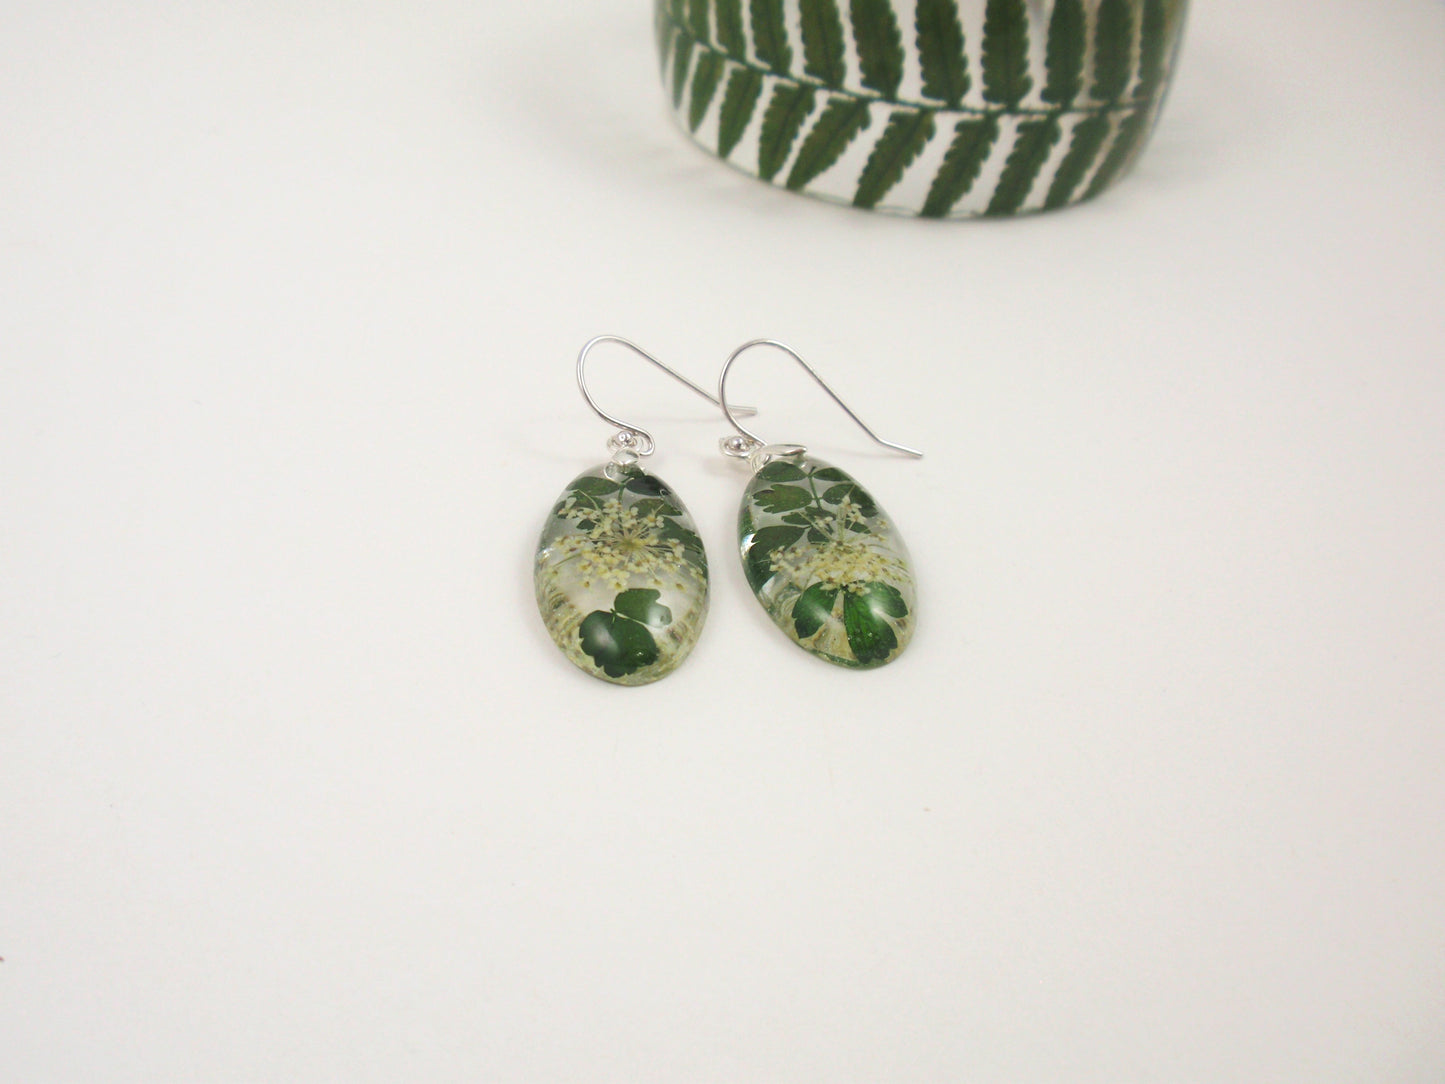 Botanical Earrings, Queen Anne's lace and leaves jewelry